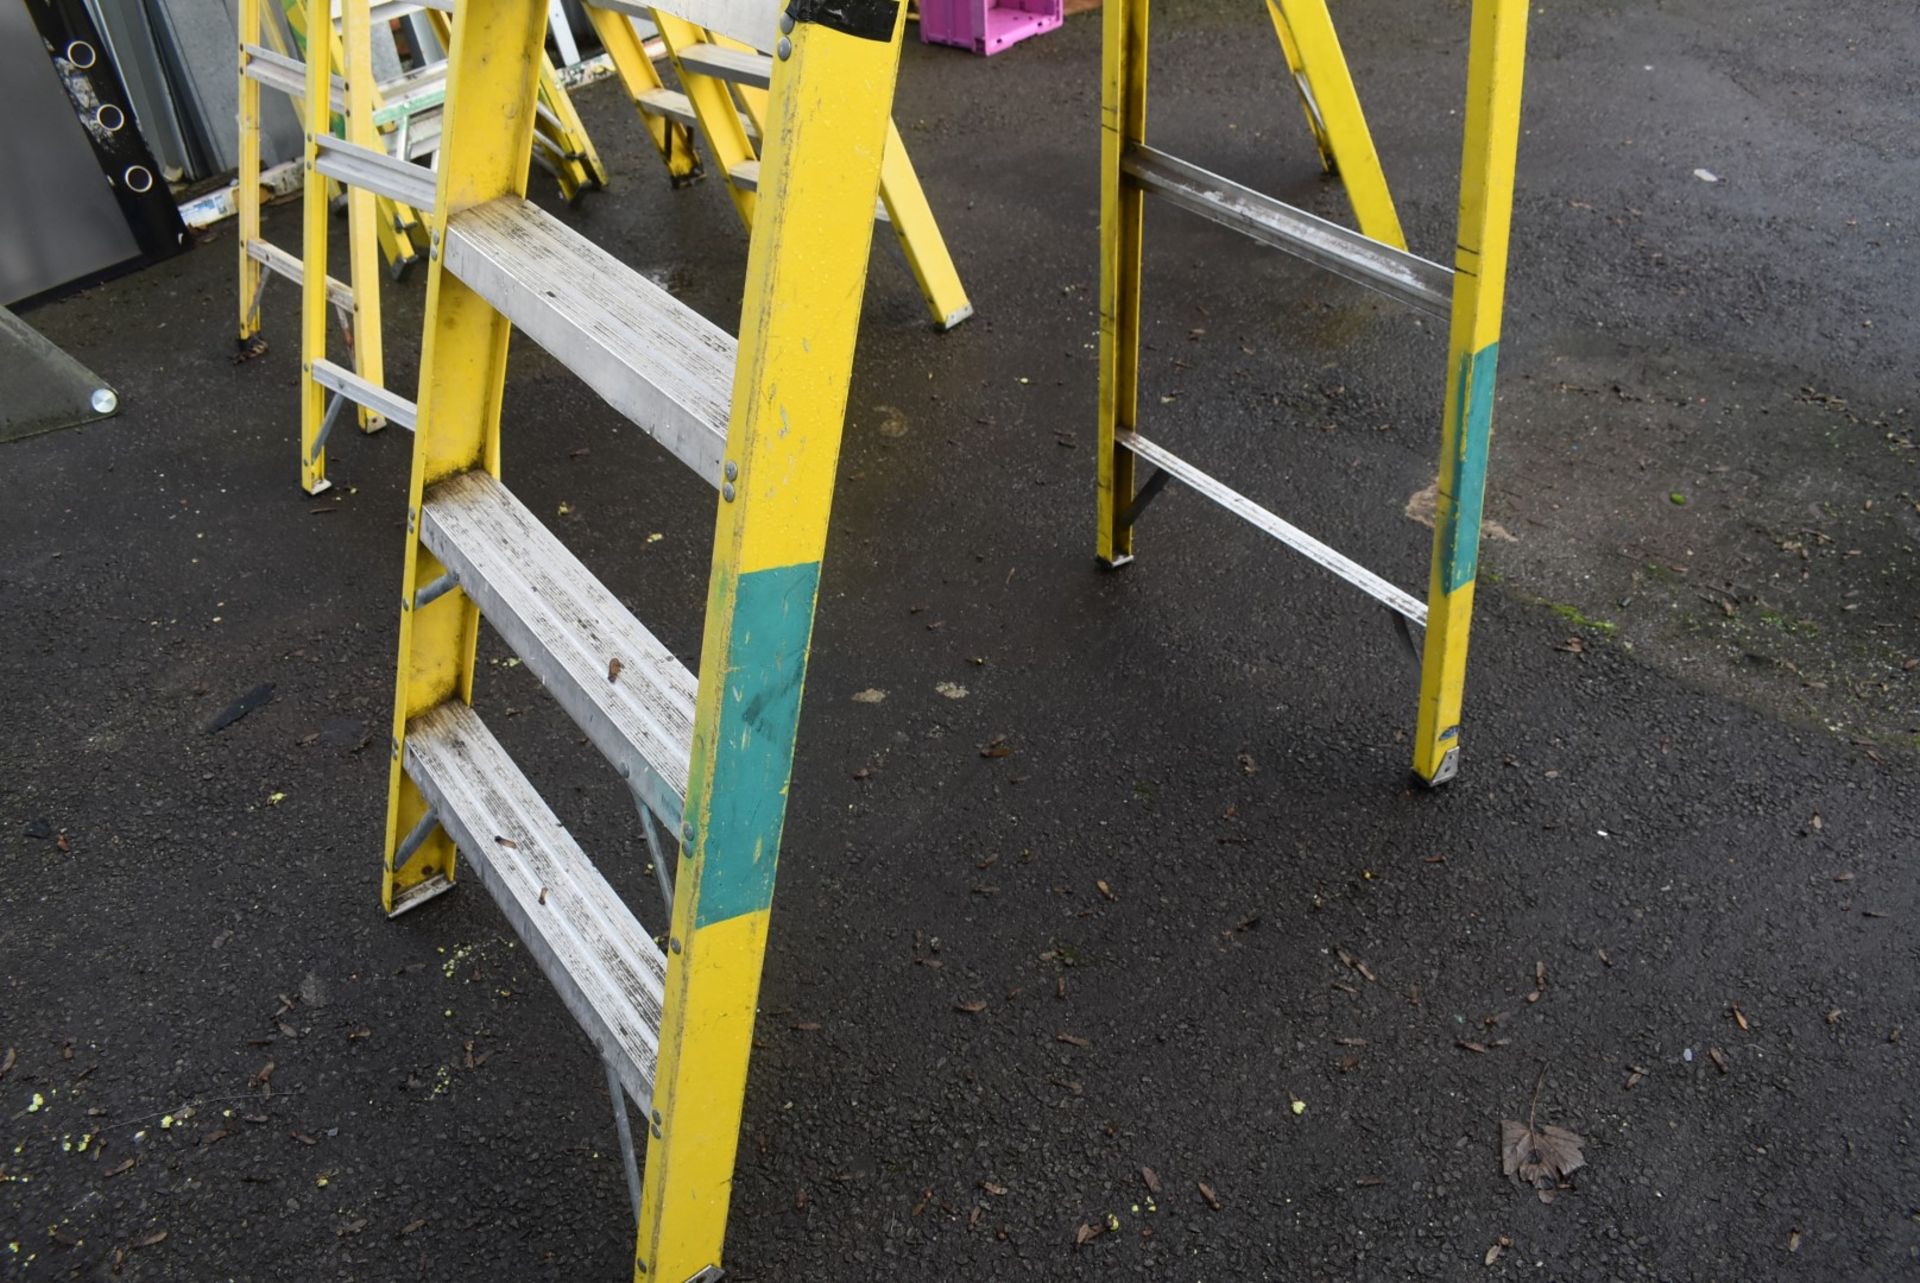 1 x Fibreglass Site Ladder With 9 Treads - Suitable For Working Around Thermal or Electrical Dangers - Image 9 of 9